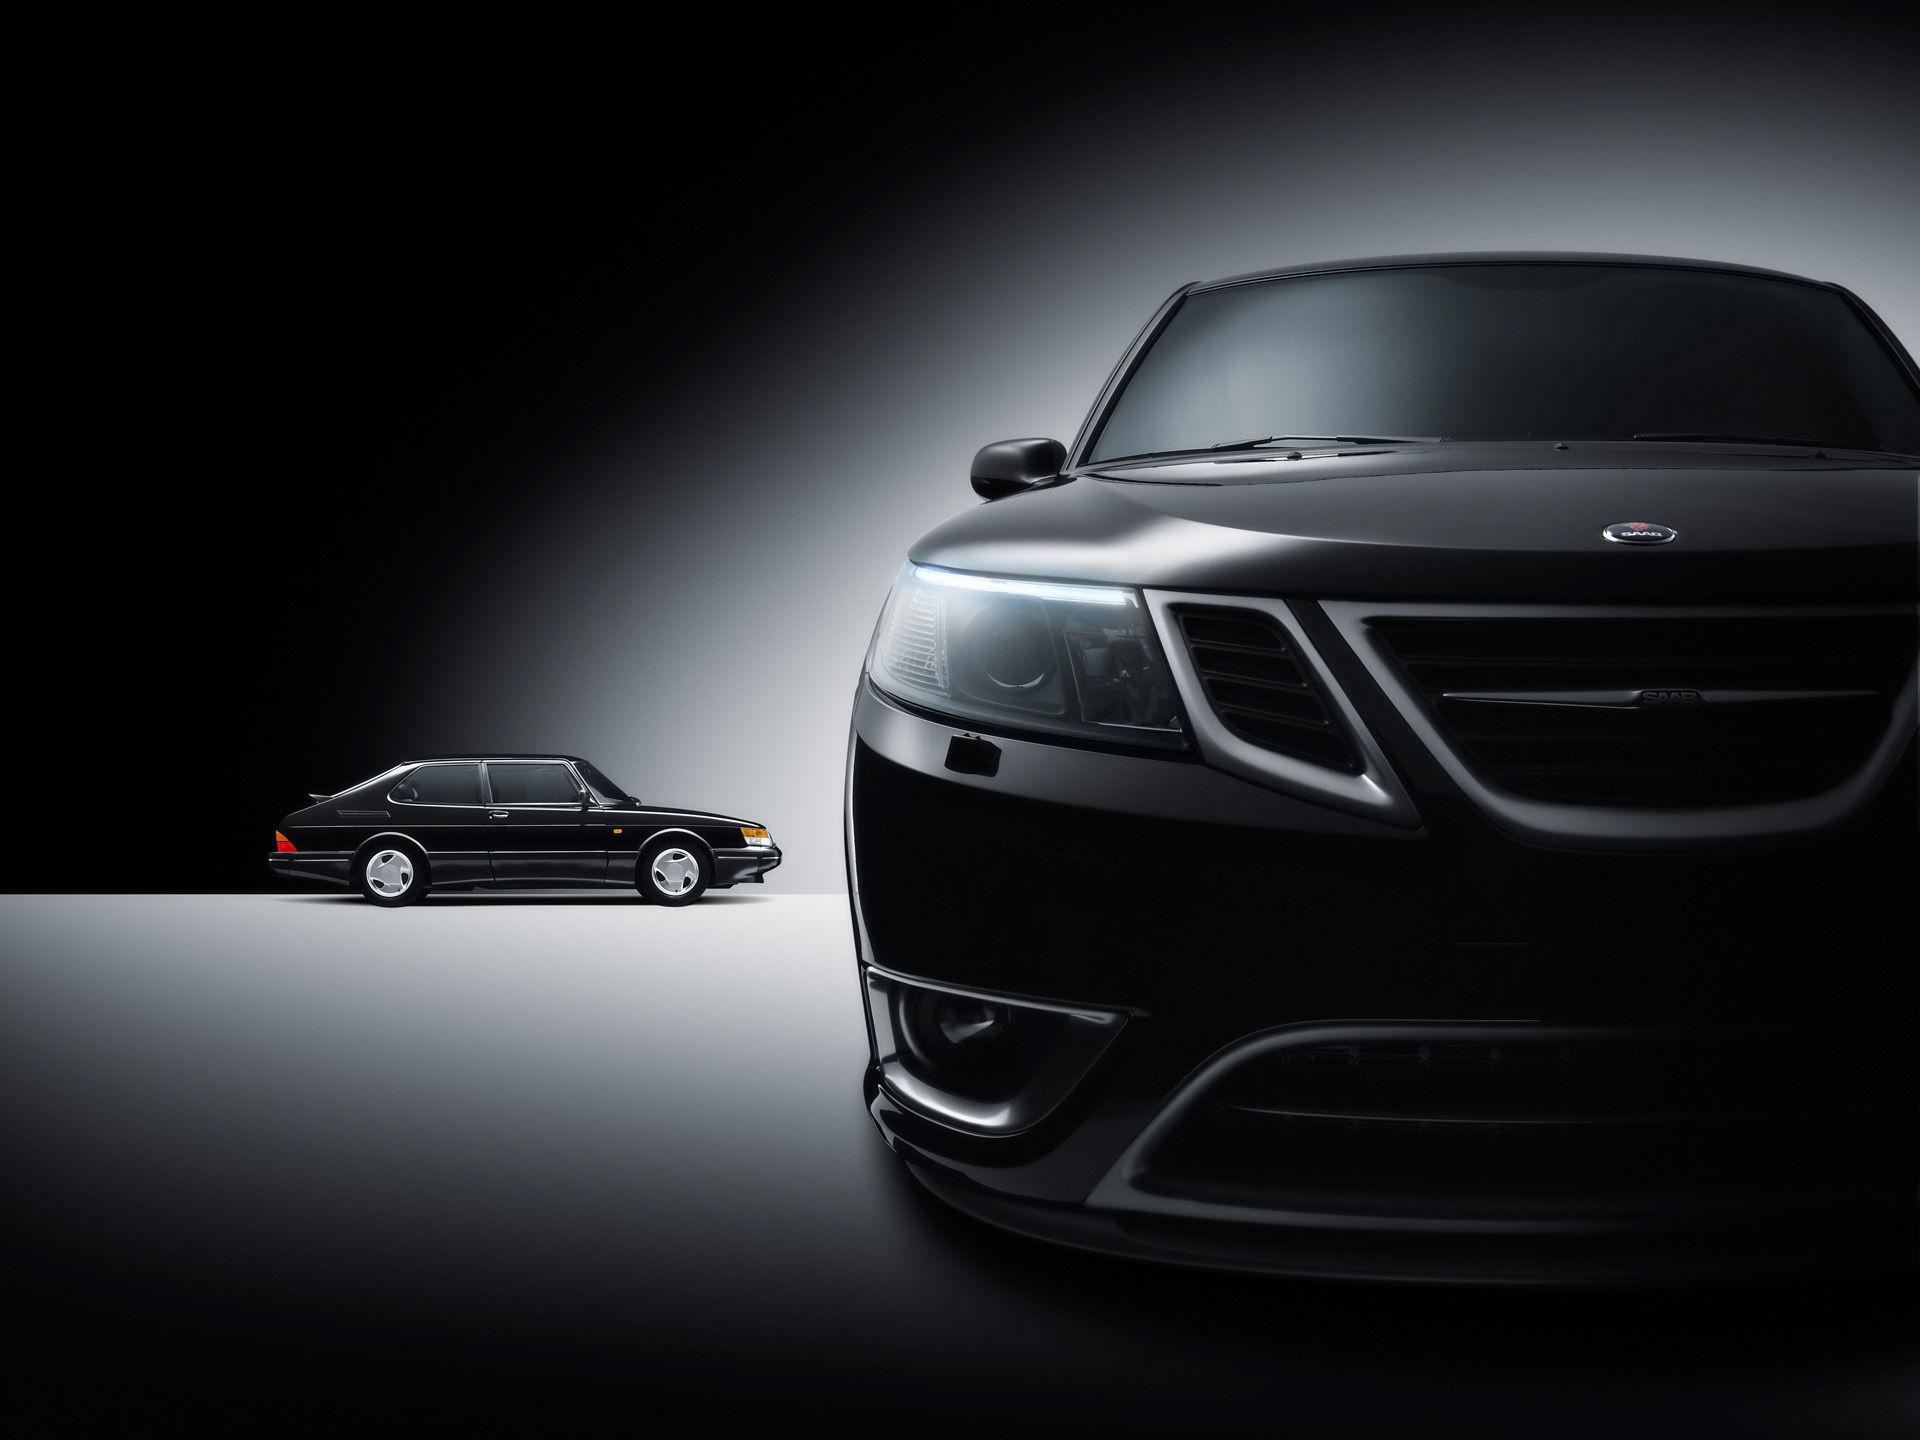 Reliable car Saab 9-3 wallpapers and images - wallpapers, pictures ...